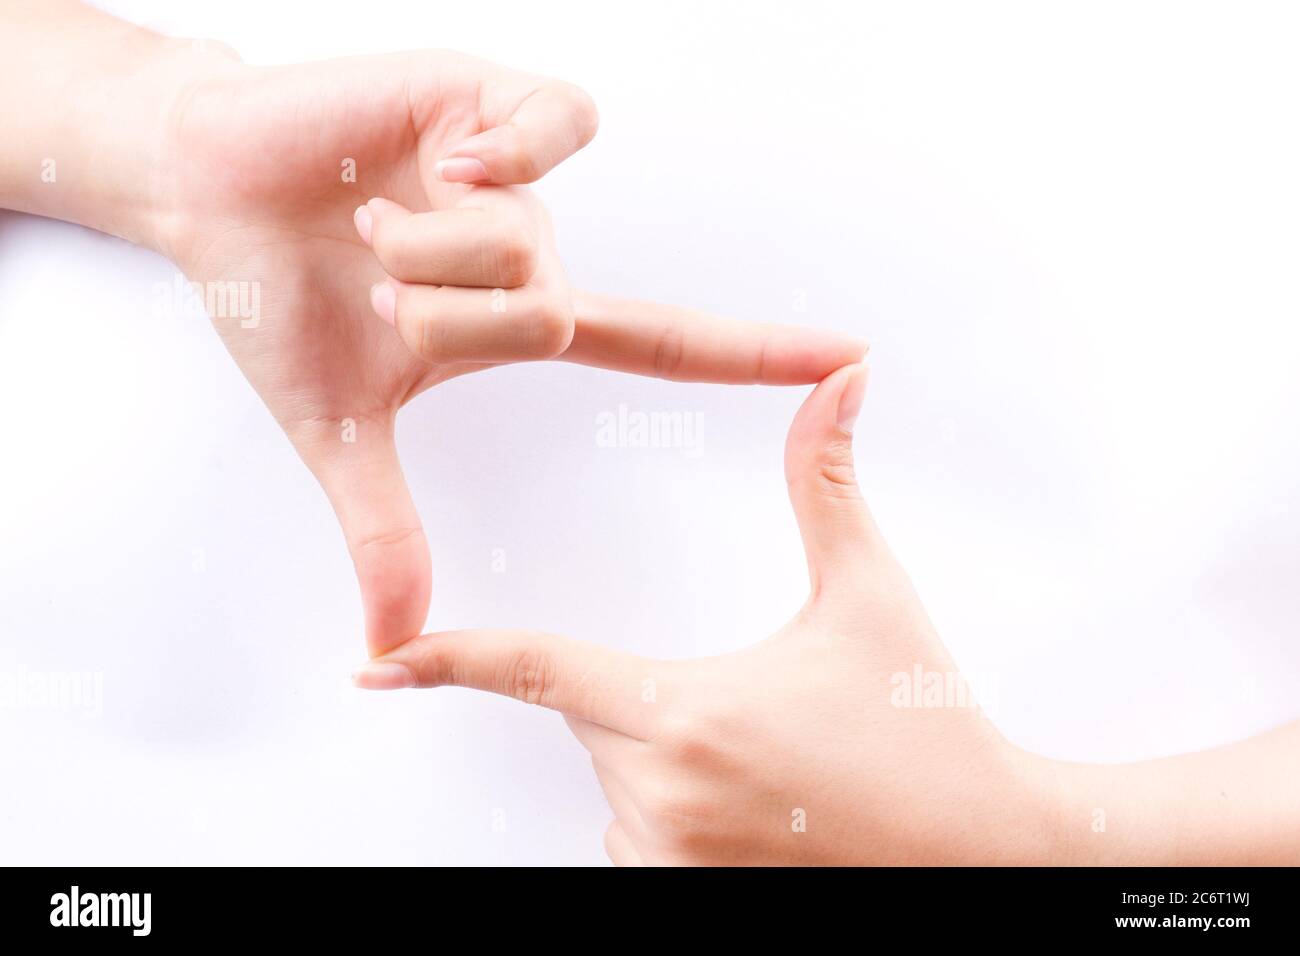 finger hand symbols concept framing composition for taking a photo Viewfinder isolated on white background Stock Photo